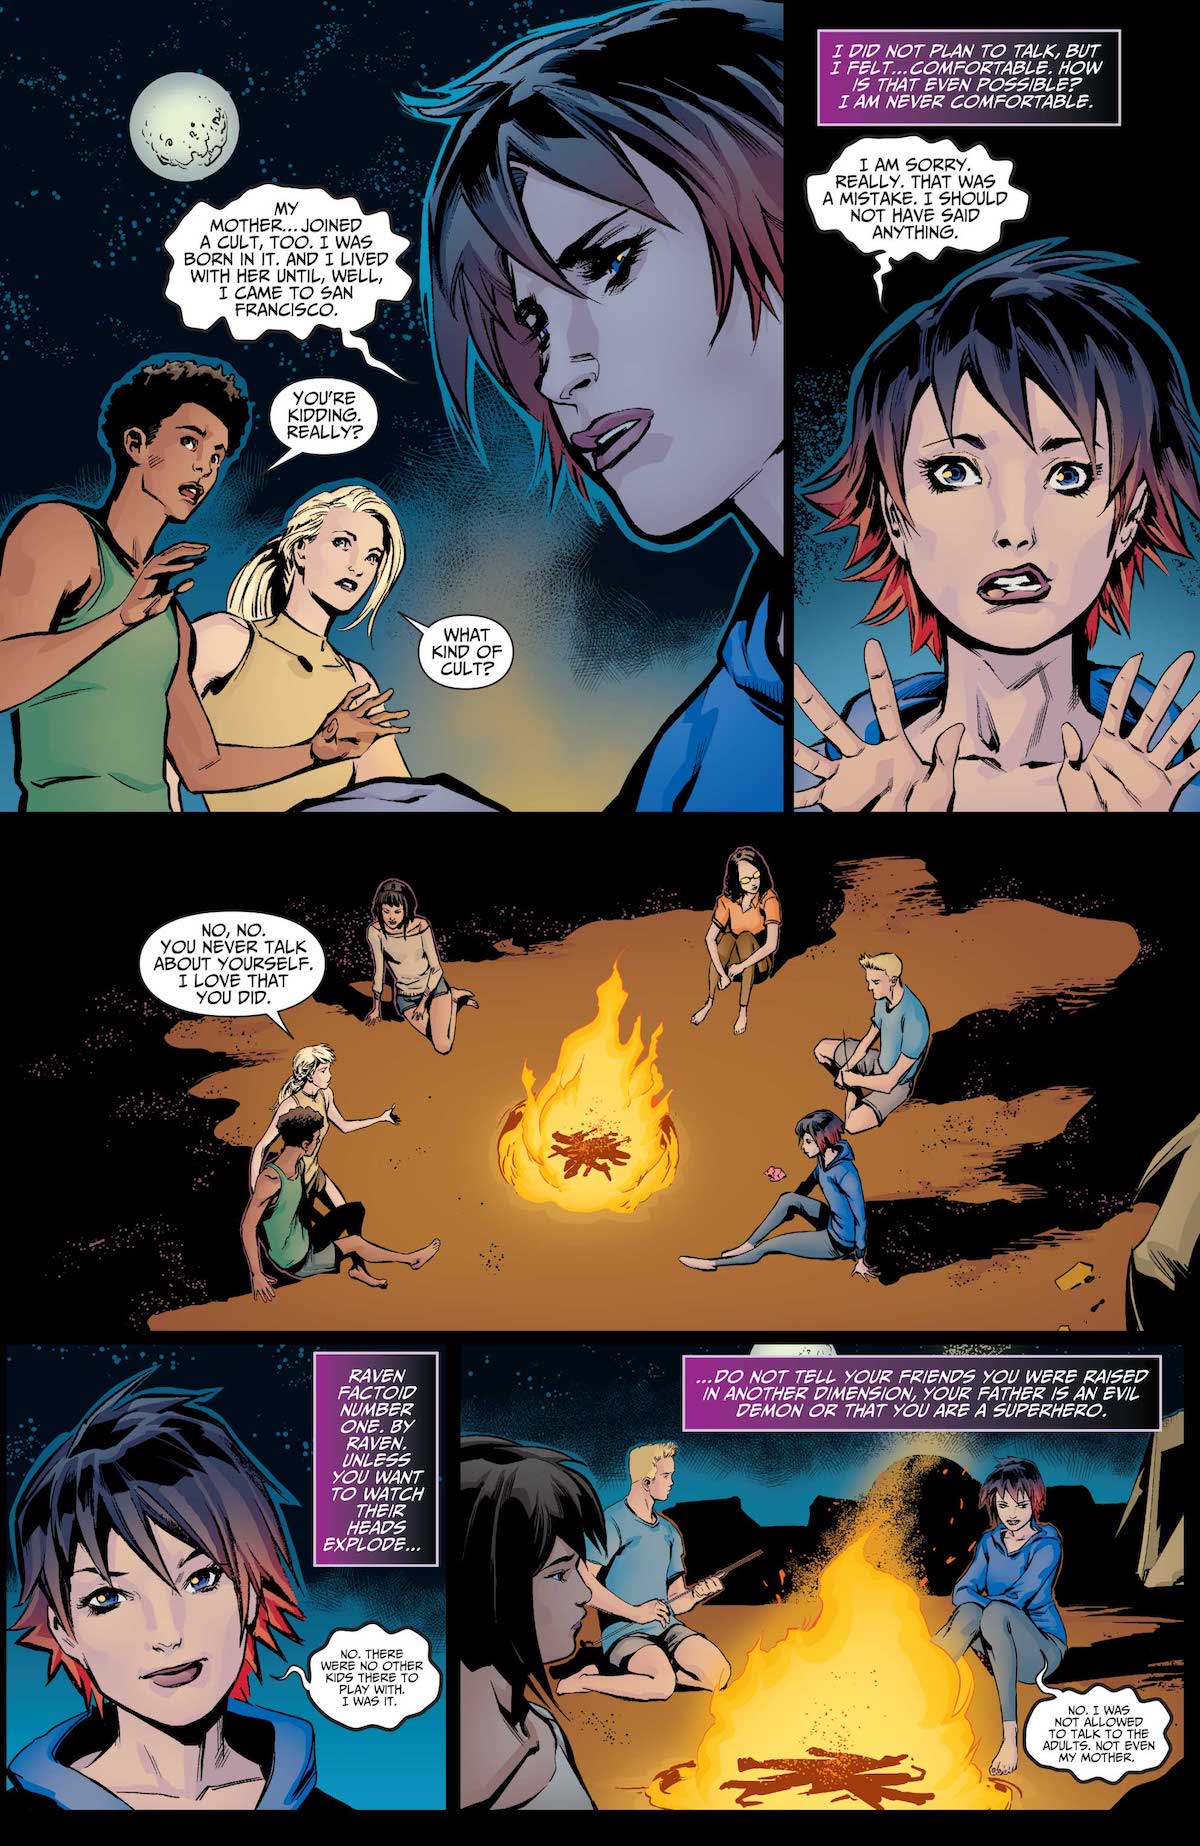 Raven Daughter of Darkness #1 page 5